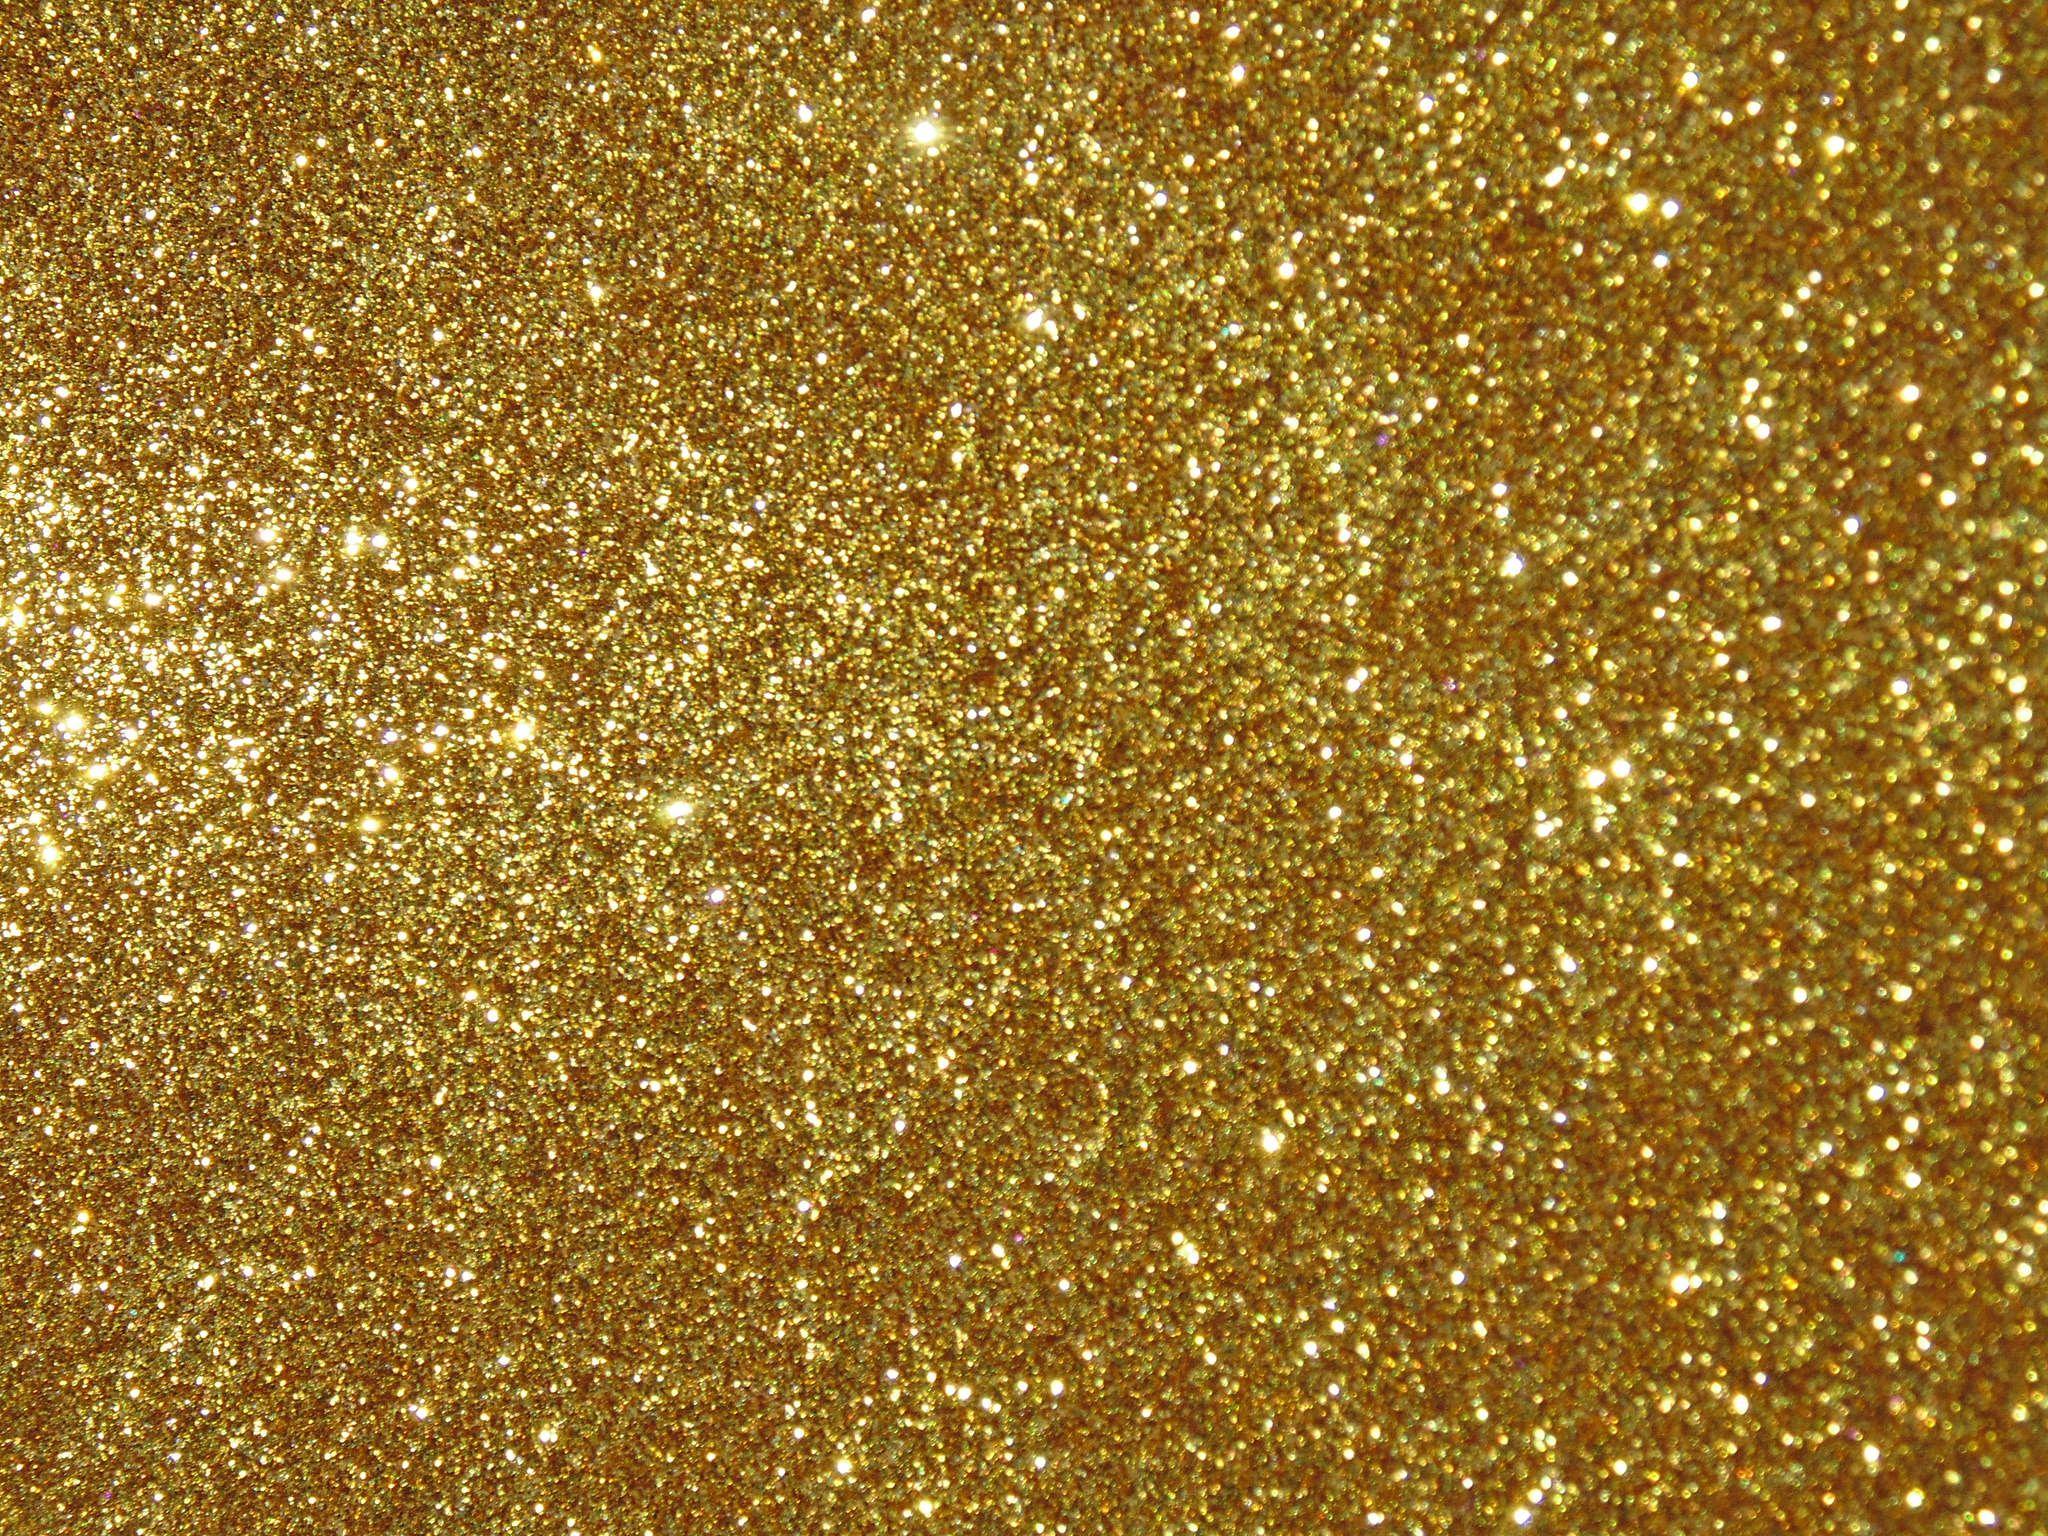 Sparkly gold wallpaper